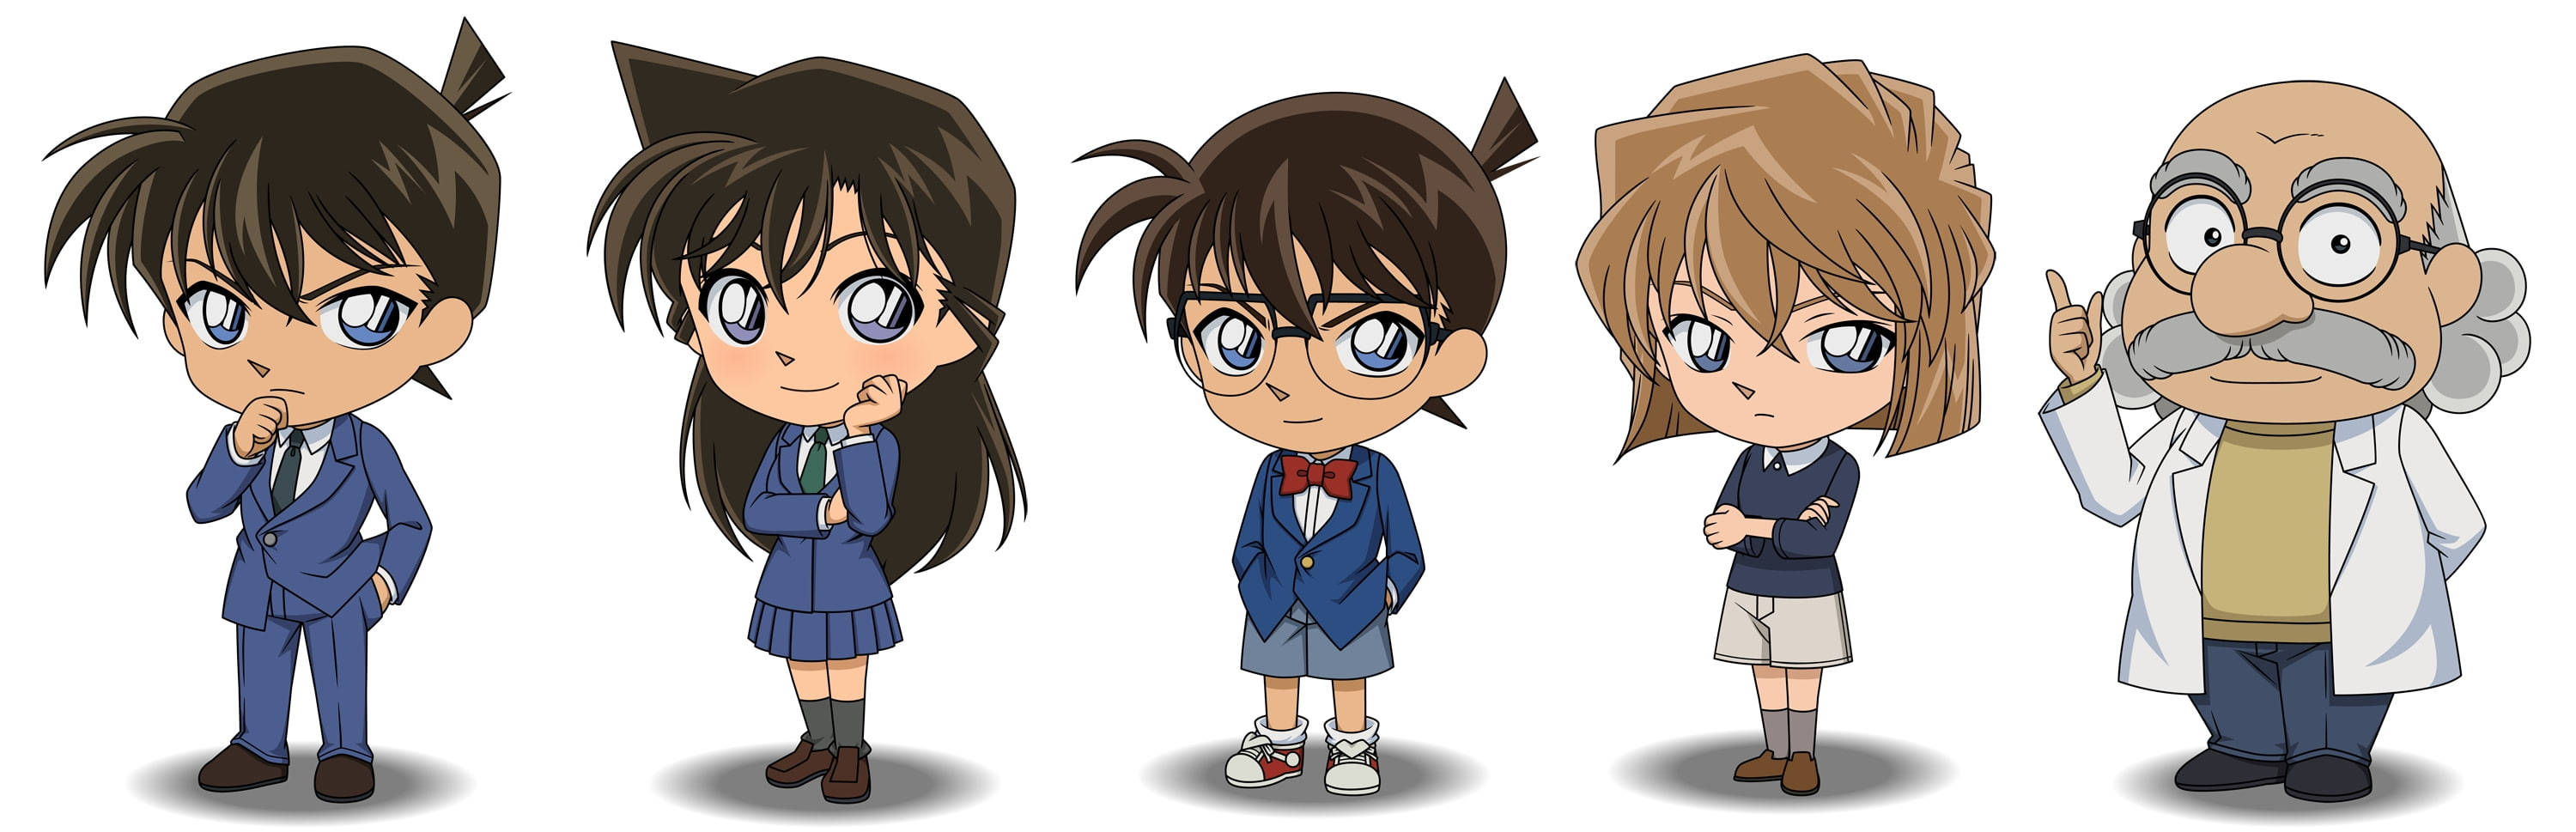 Detective Conan Chibi Characters Background